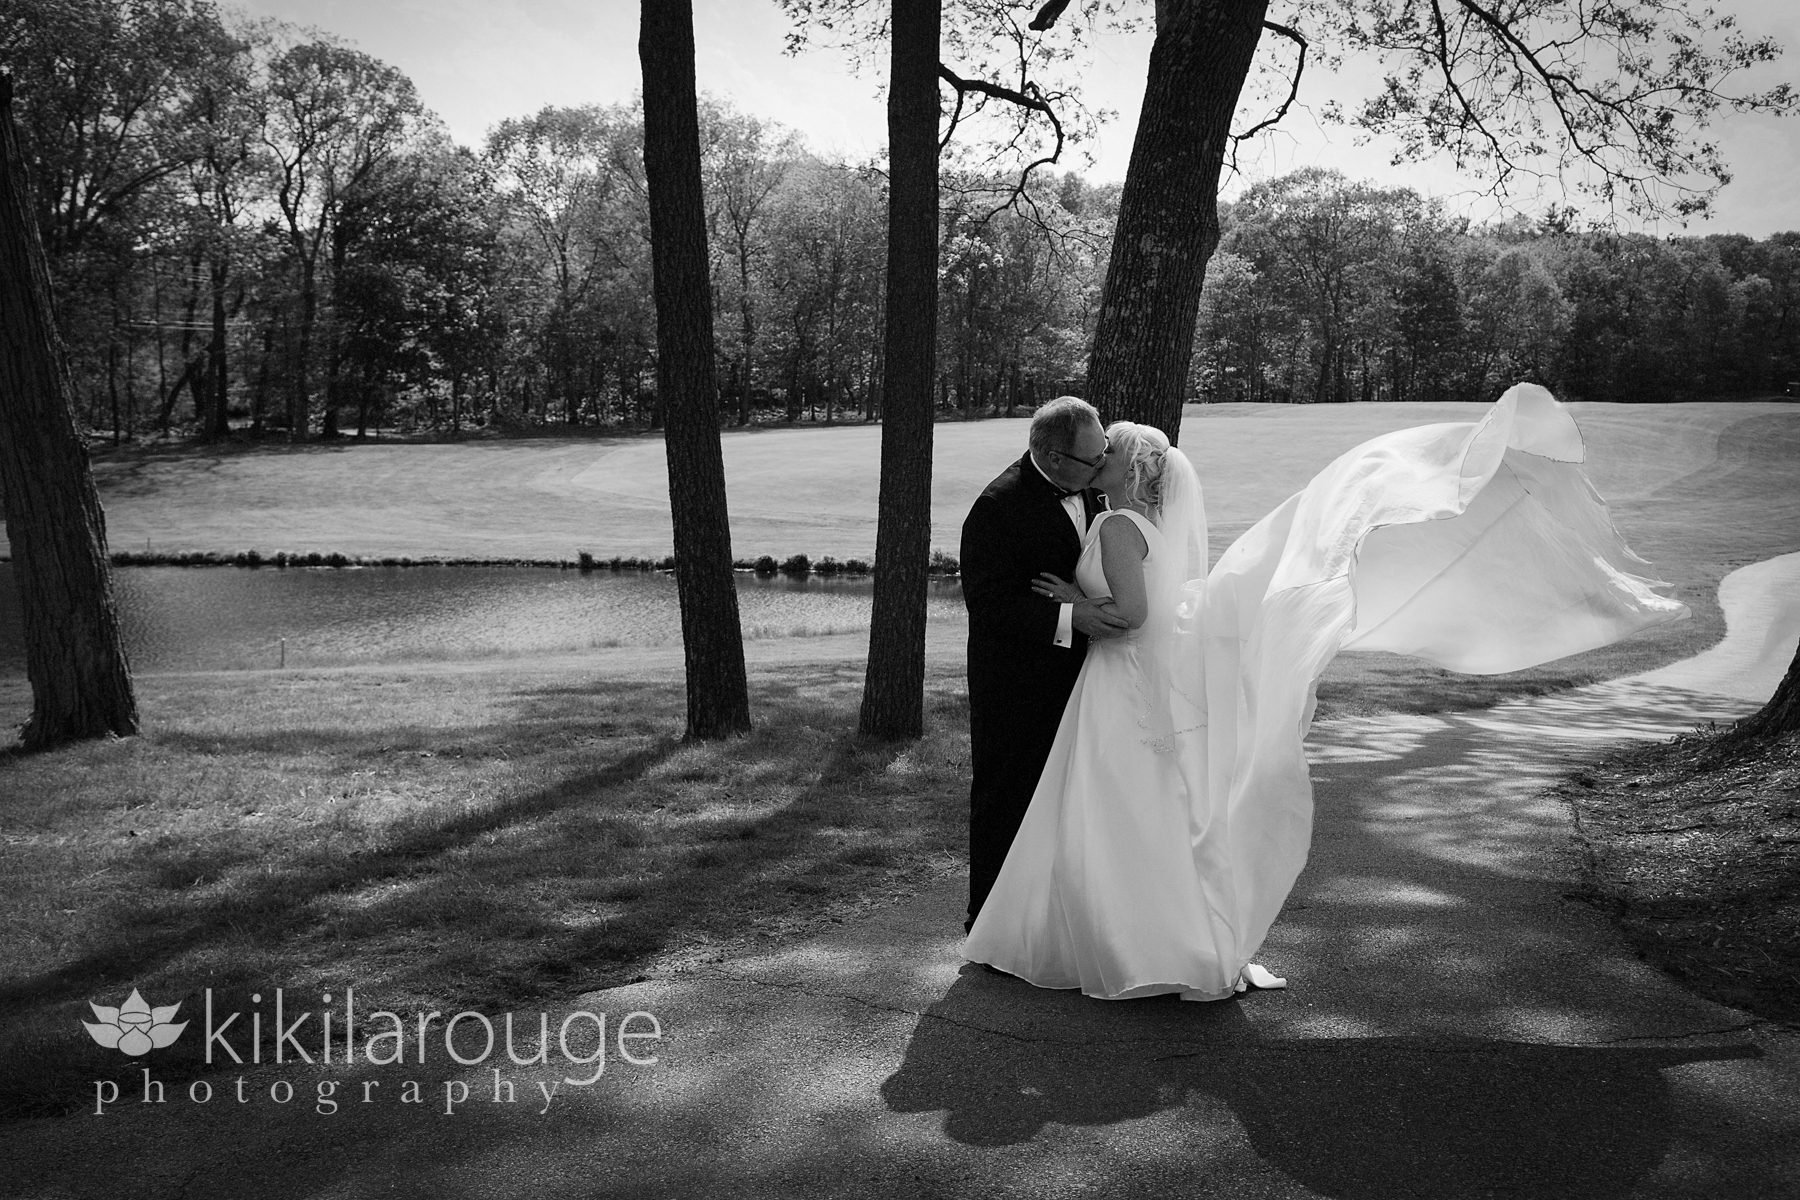 Couple portrait with wedding dress blowing